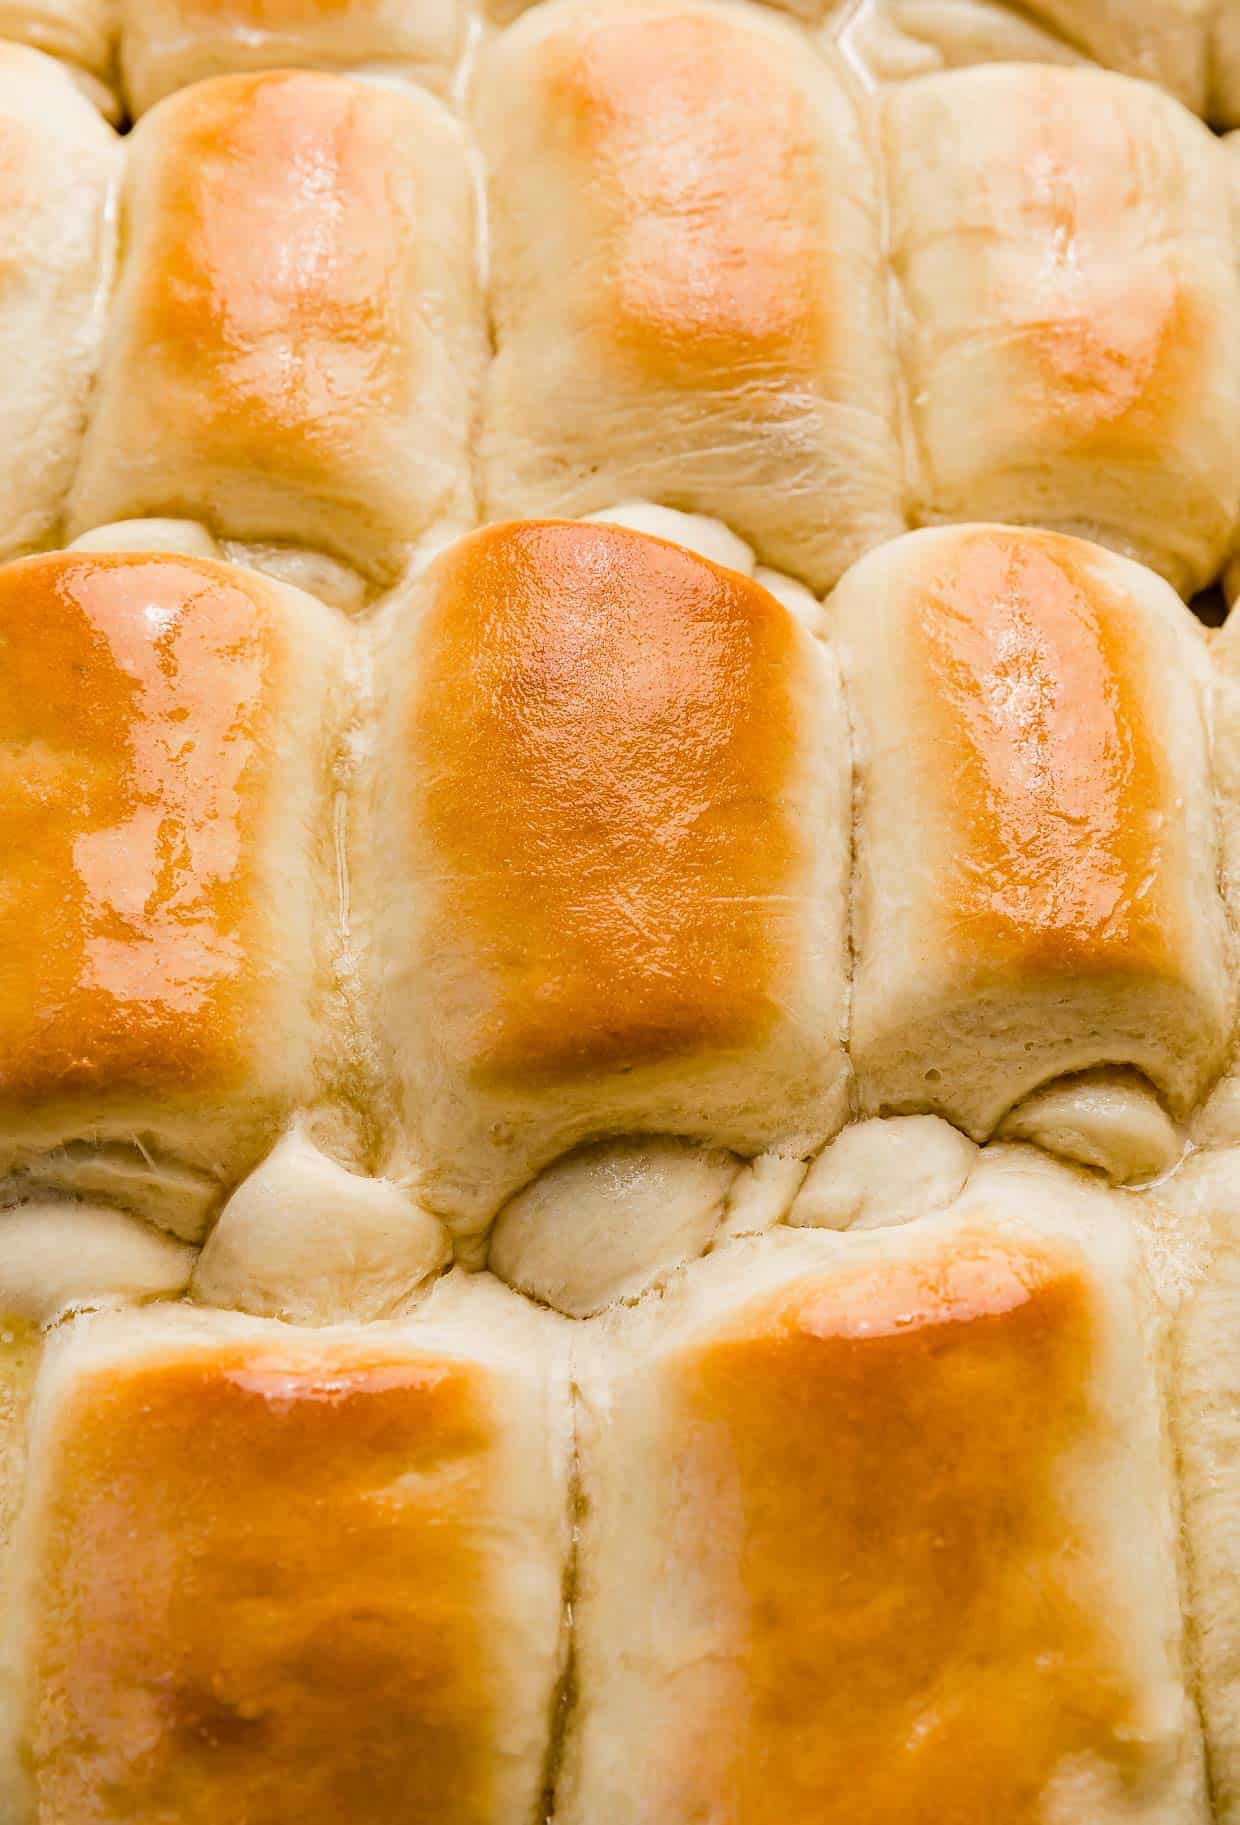 Golden Lion House Rolls rolled in the signature "Lion House" way, lined up next to each other on a baking sheet.